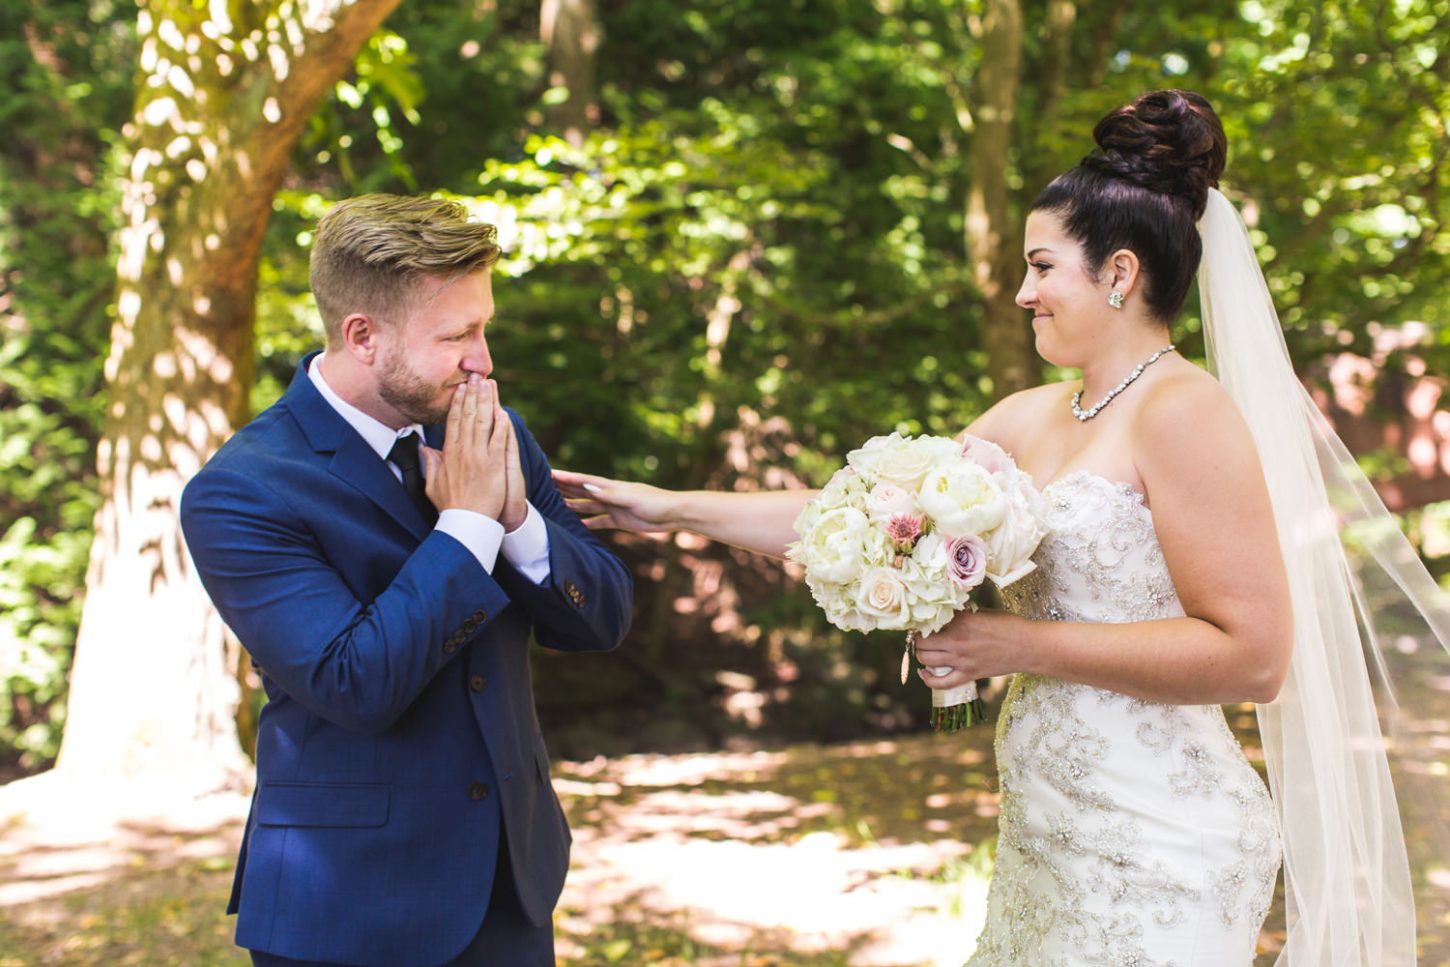 Groom reacts to seeing bride for the first time